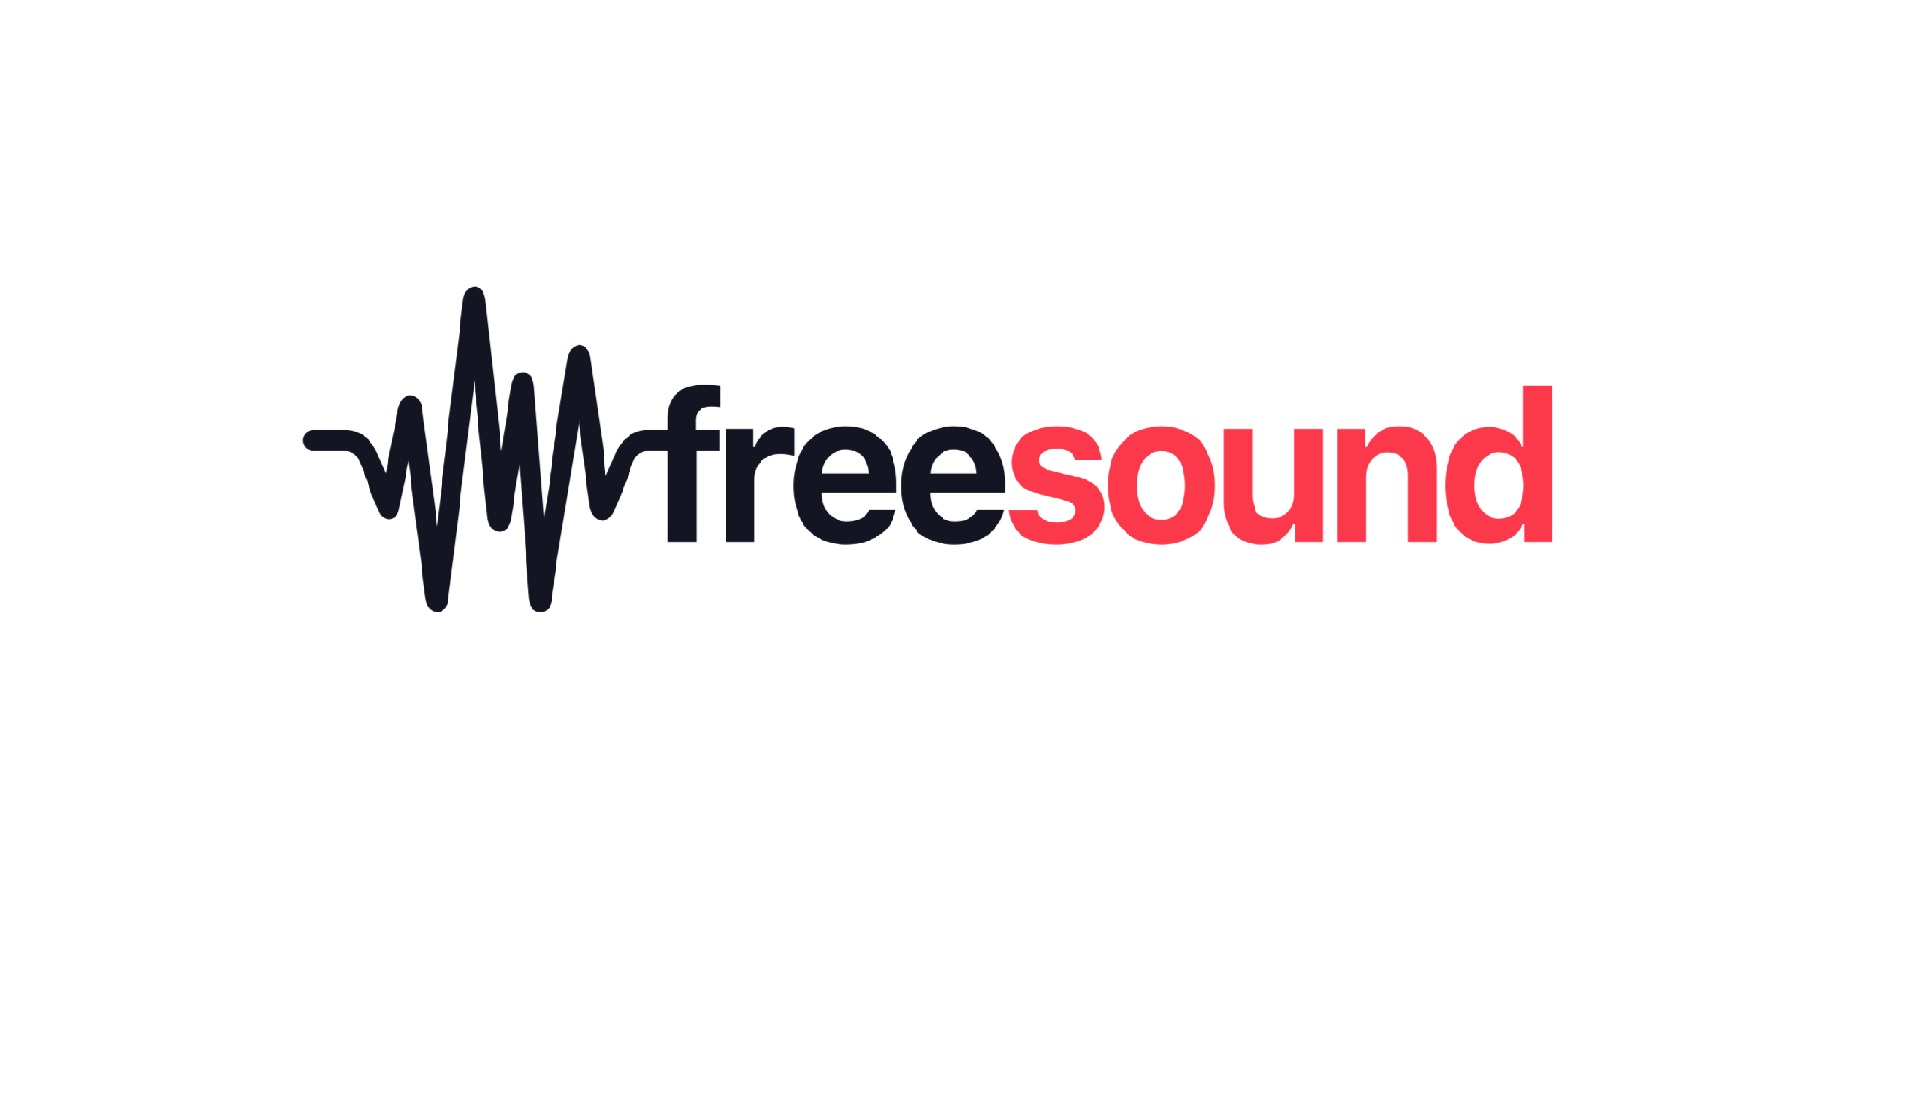 What Can You Do with FreeSound?